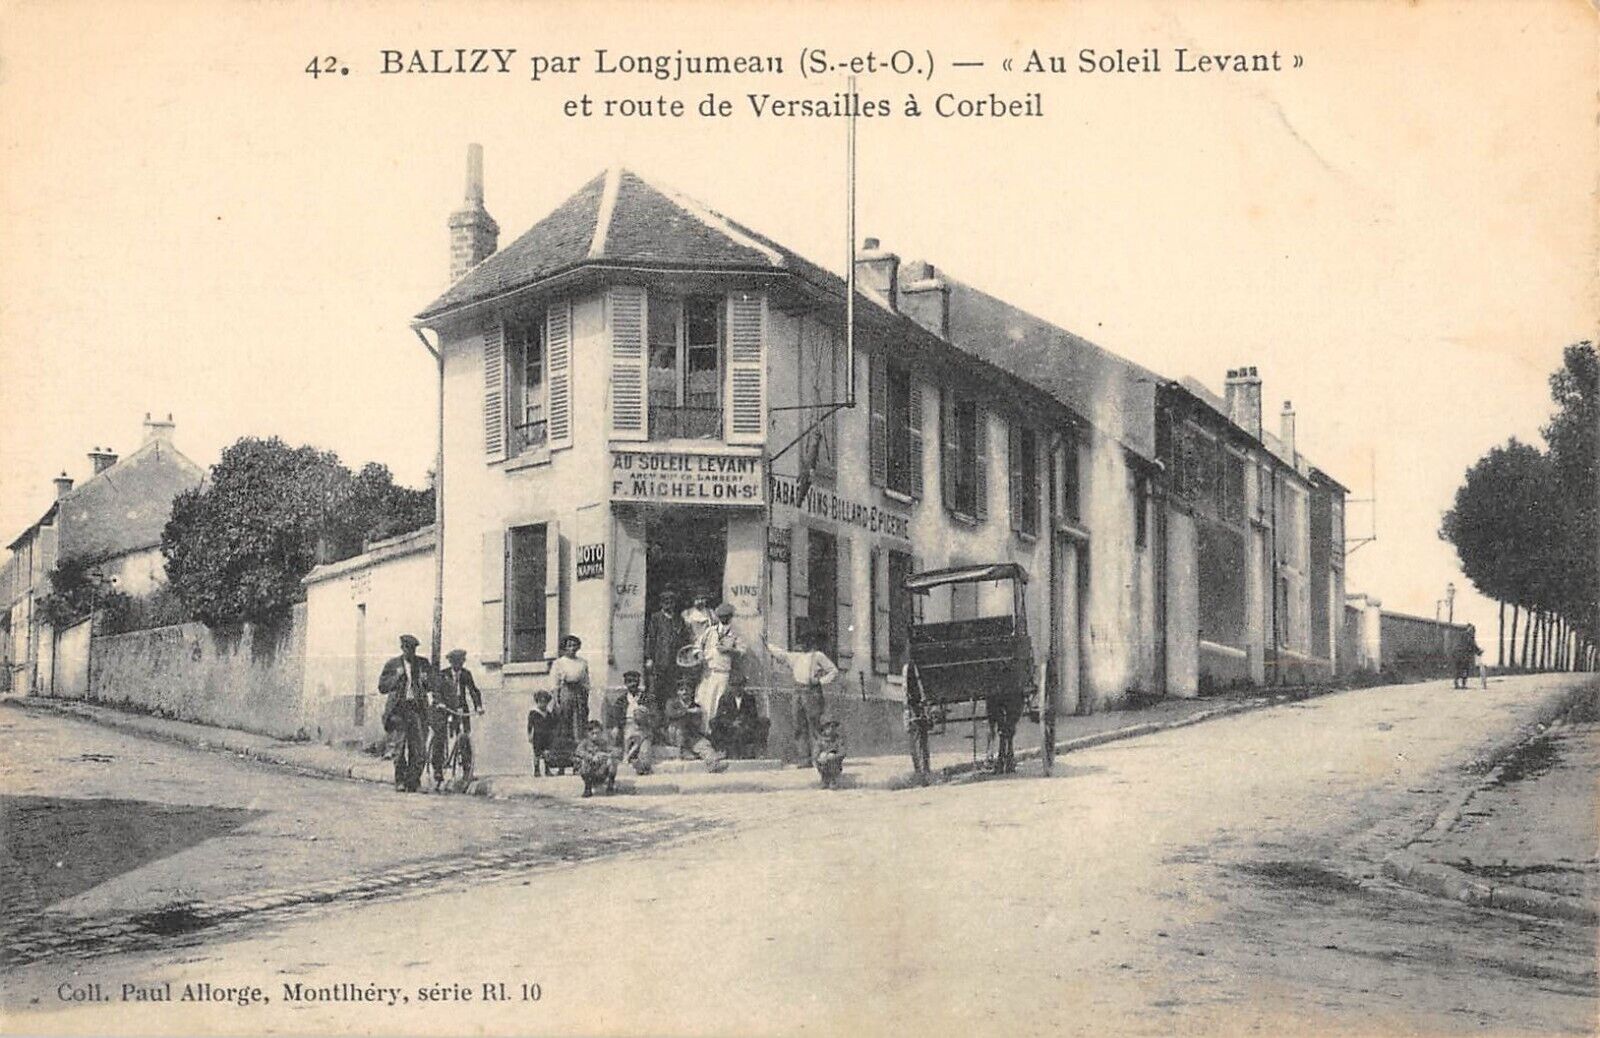 CPA 91 BALIZY / BY LONGJUMEAU / IN THE RISING SUN / F.MICHELON / TABACS / ROAD